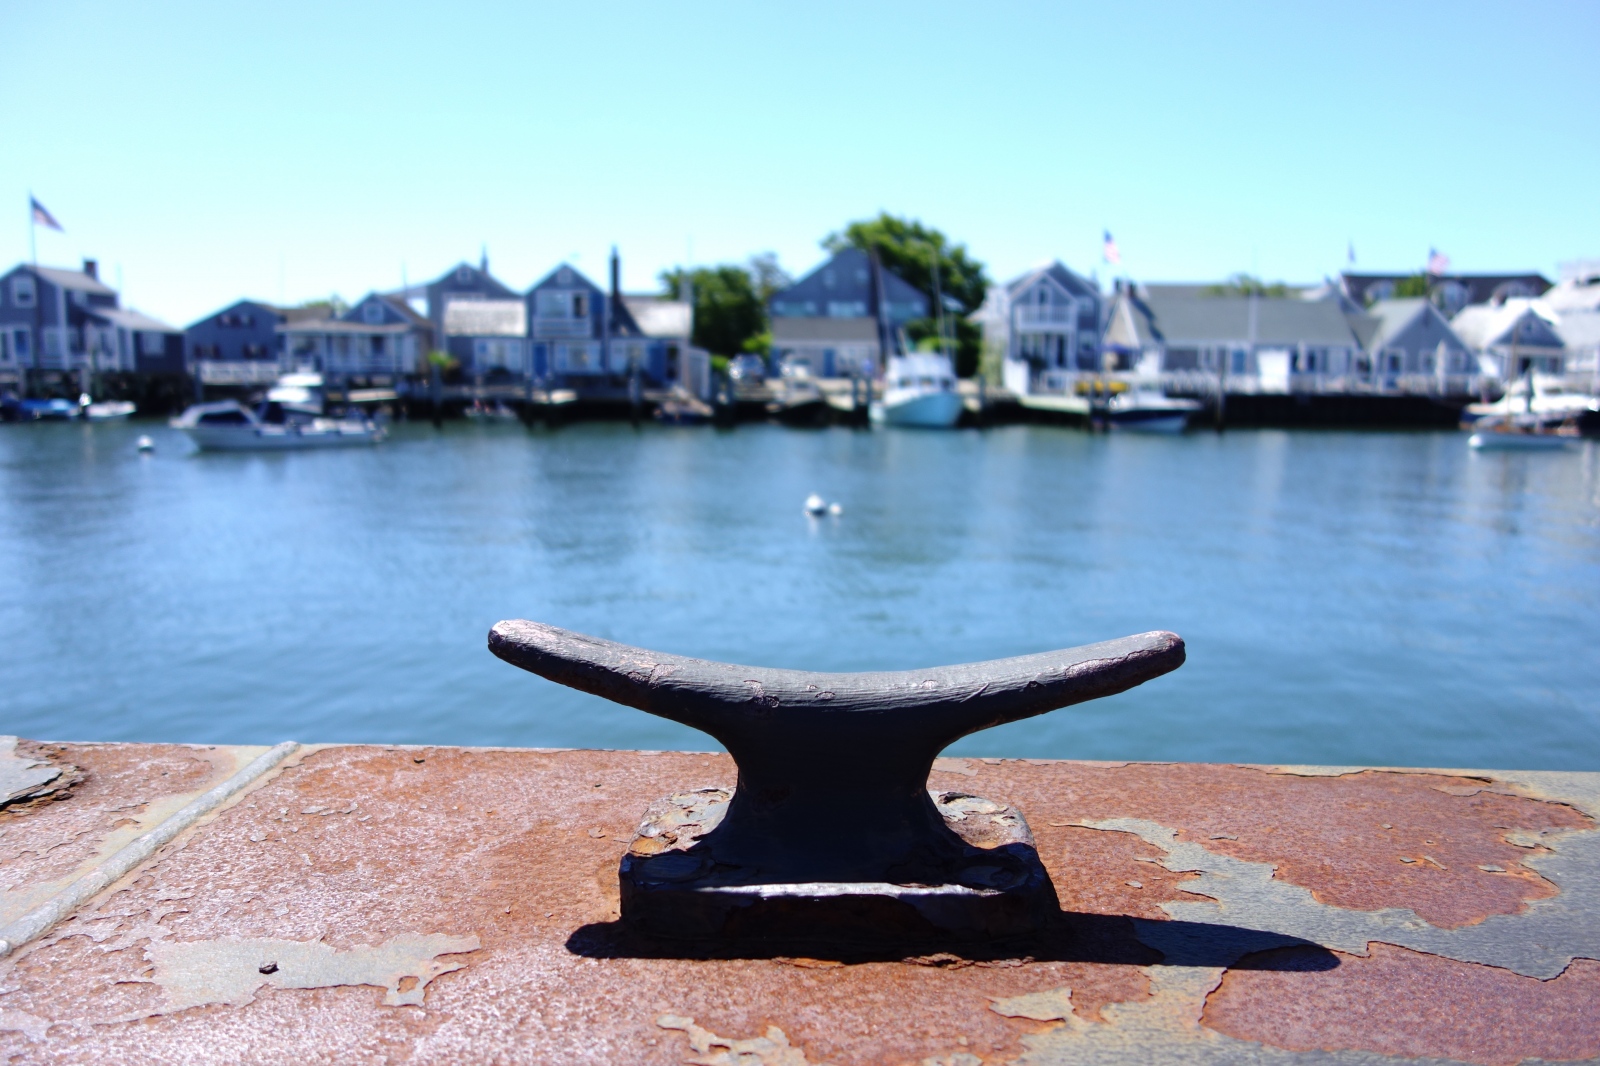 At the Water's Edge - Docking Cleat, Steamboat Wharf, Nantucket, MA